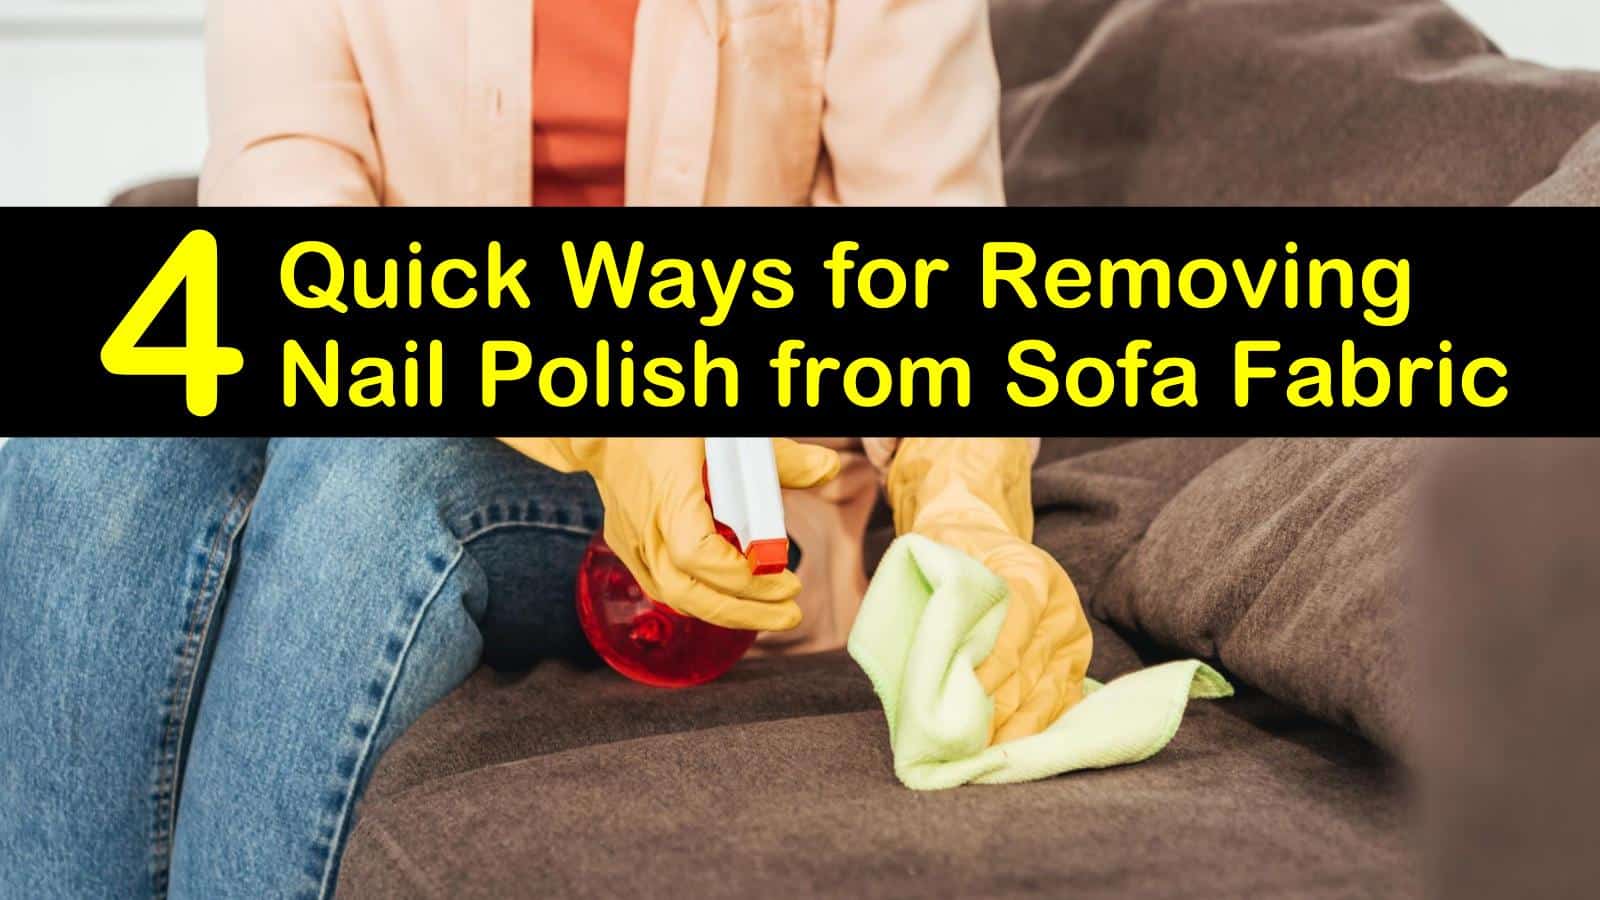 How to Get Nail Polish Remover Off Tile | Hunker